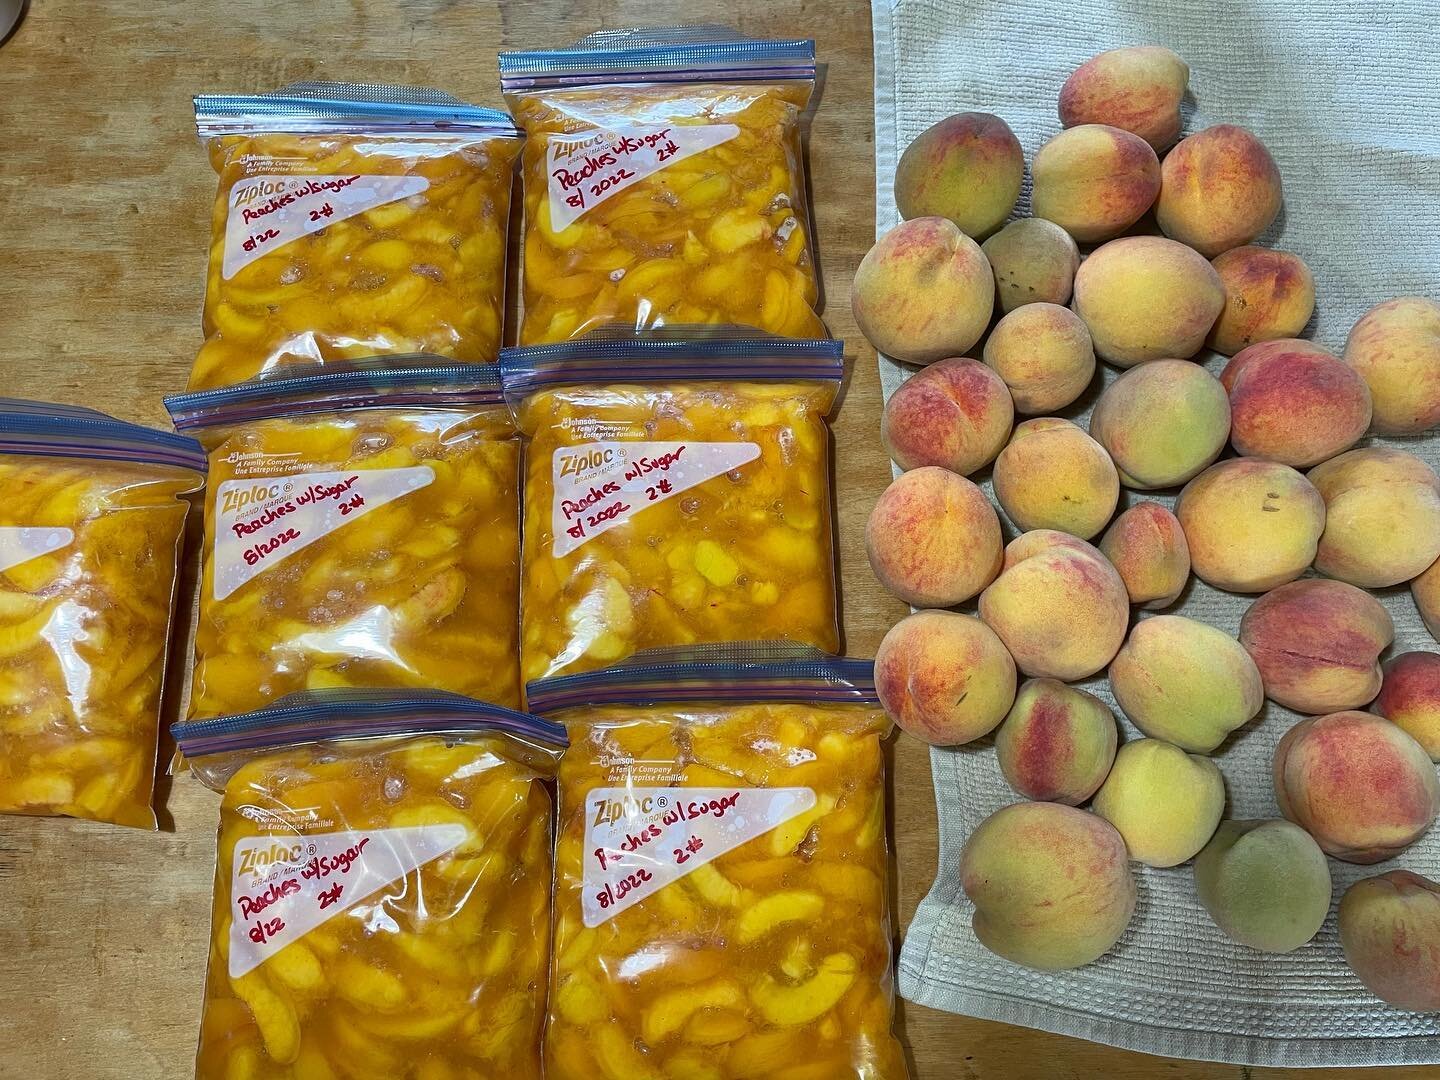 14# of our own farm peaches ready for the freezer, plus a few that still need to ripen. Saved a couple pounds in the fridge to make peach cobbler tonight too. What&rsquo;s your favorite summertime recipe? #farmgrown #freshpeaches #summerflavors #rain